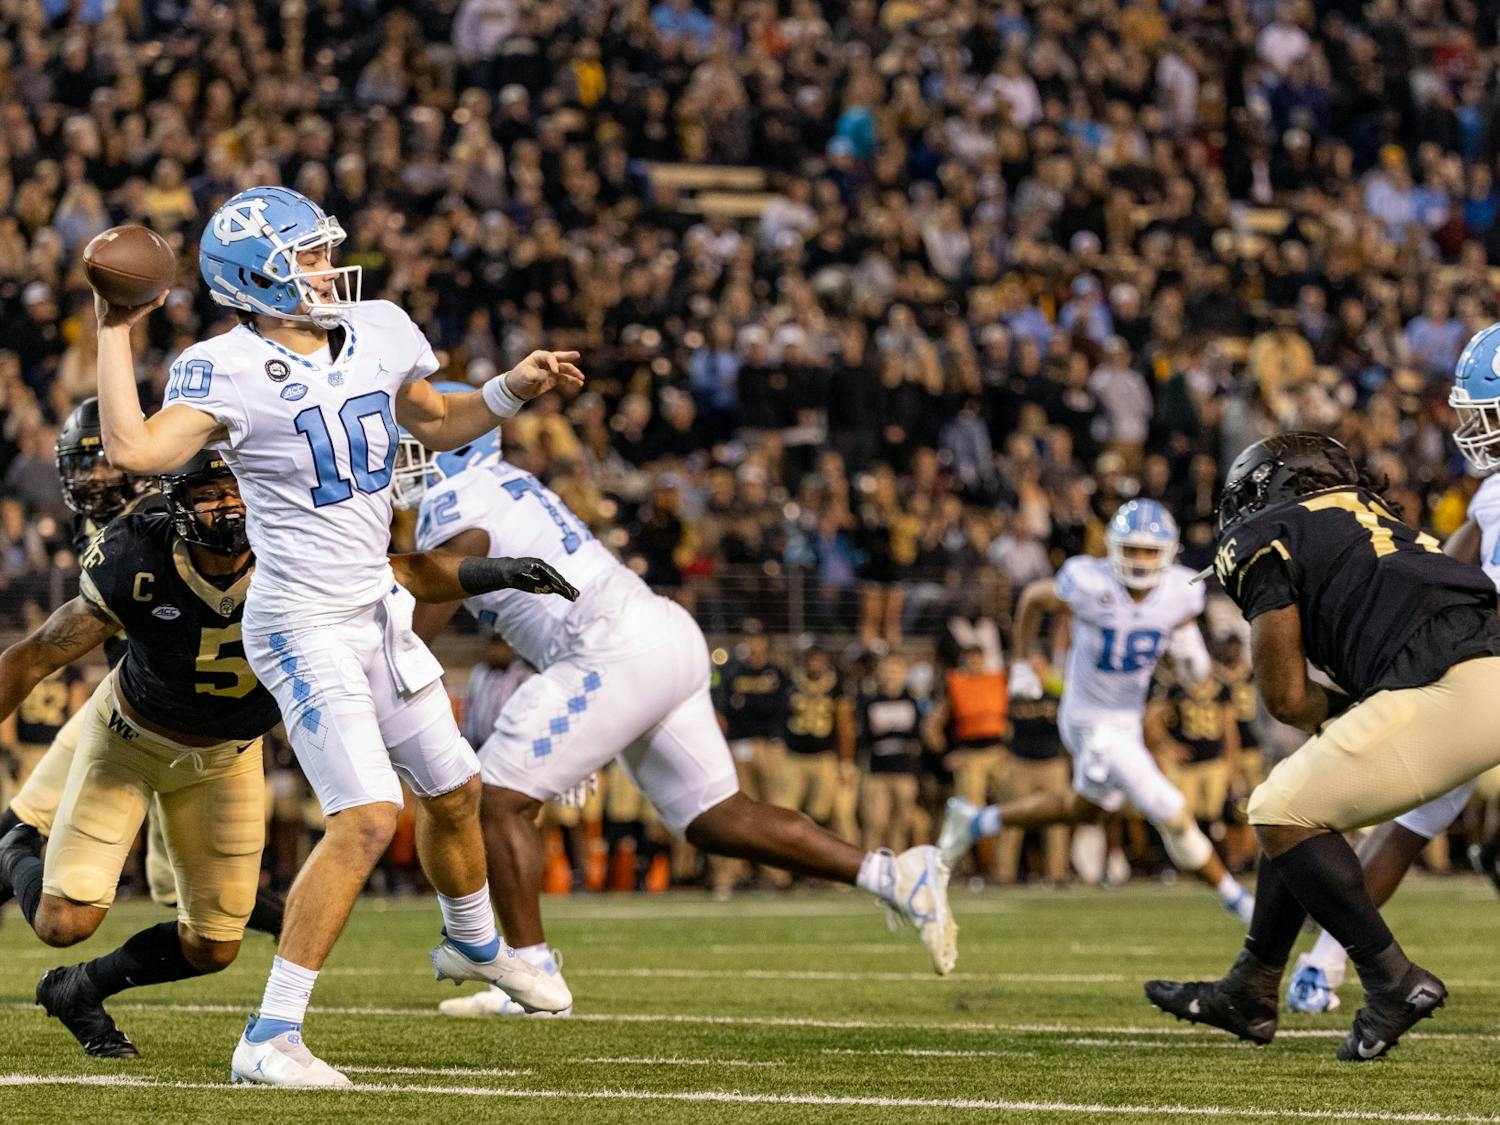 UNC first-year quarterback Drake Maye (10), throws a pass at the UNC vs. Wake Forest football game in Truist Stadium on Nov. 12, 2022. UNC won 36-34.